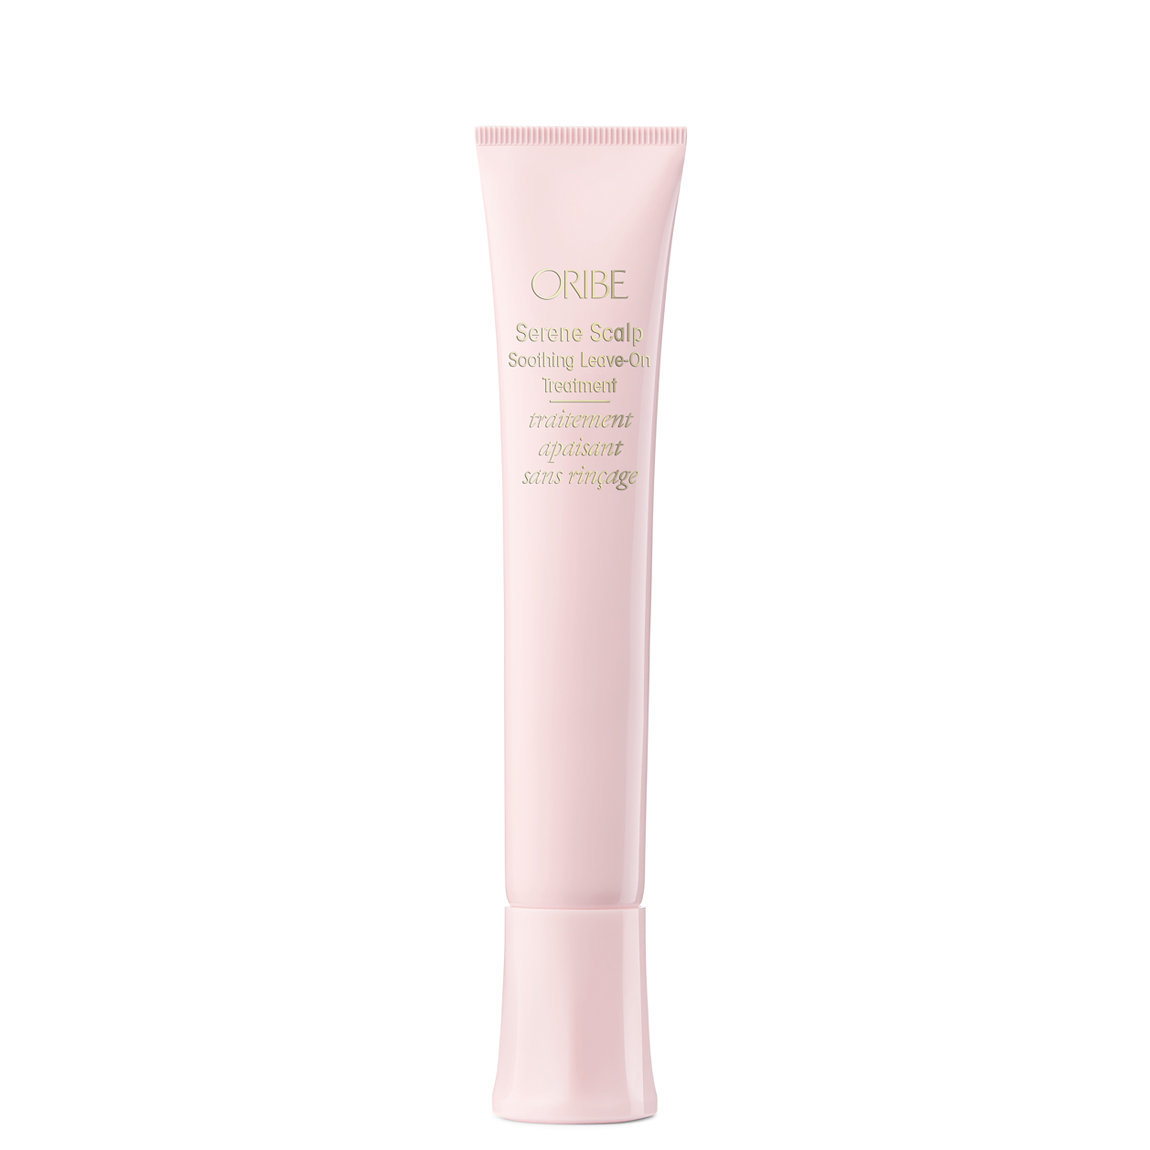 Oribe Serene Scalp Soothing Leave-On Treatment alternative view 1 - product swatch.